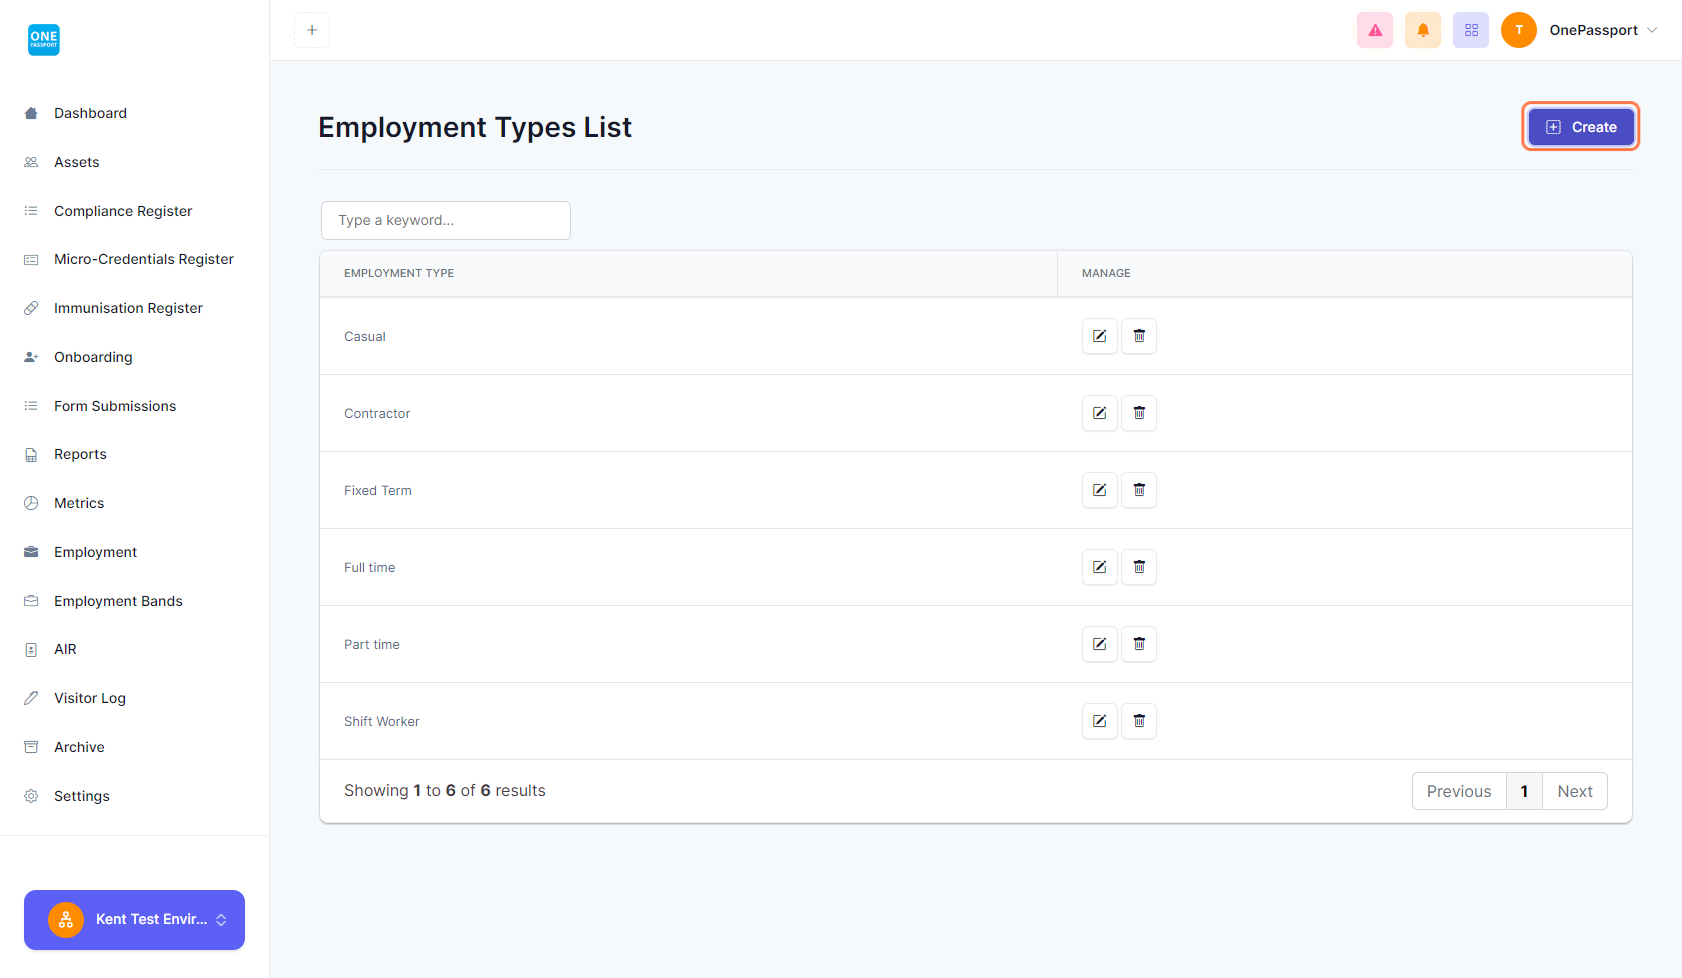 The system has the default list of employment. 
Add employment type by clicking the Create button.
